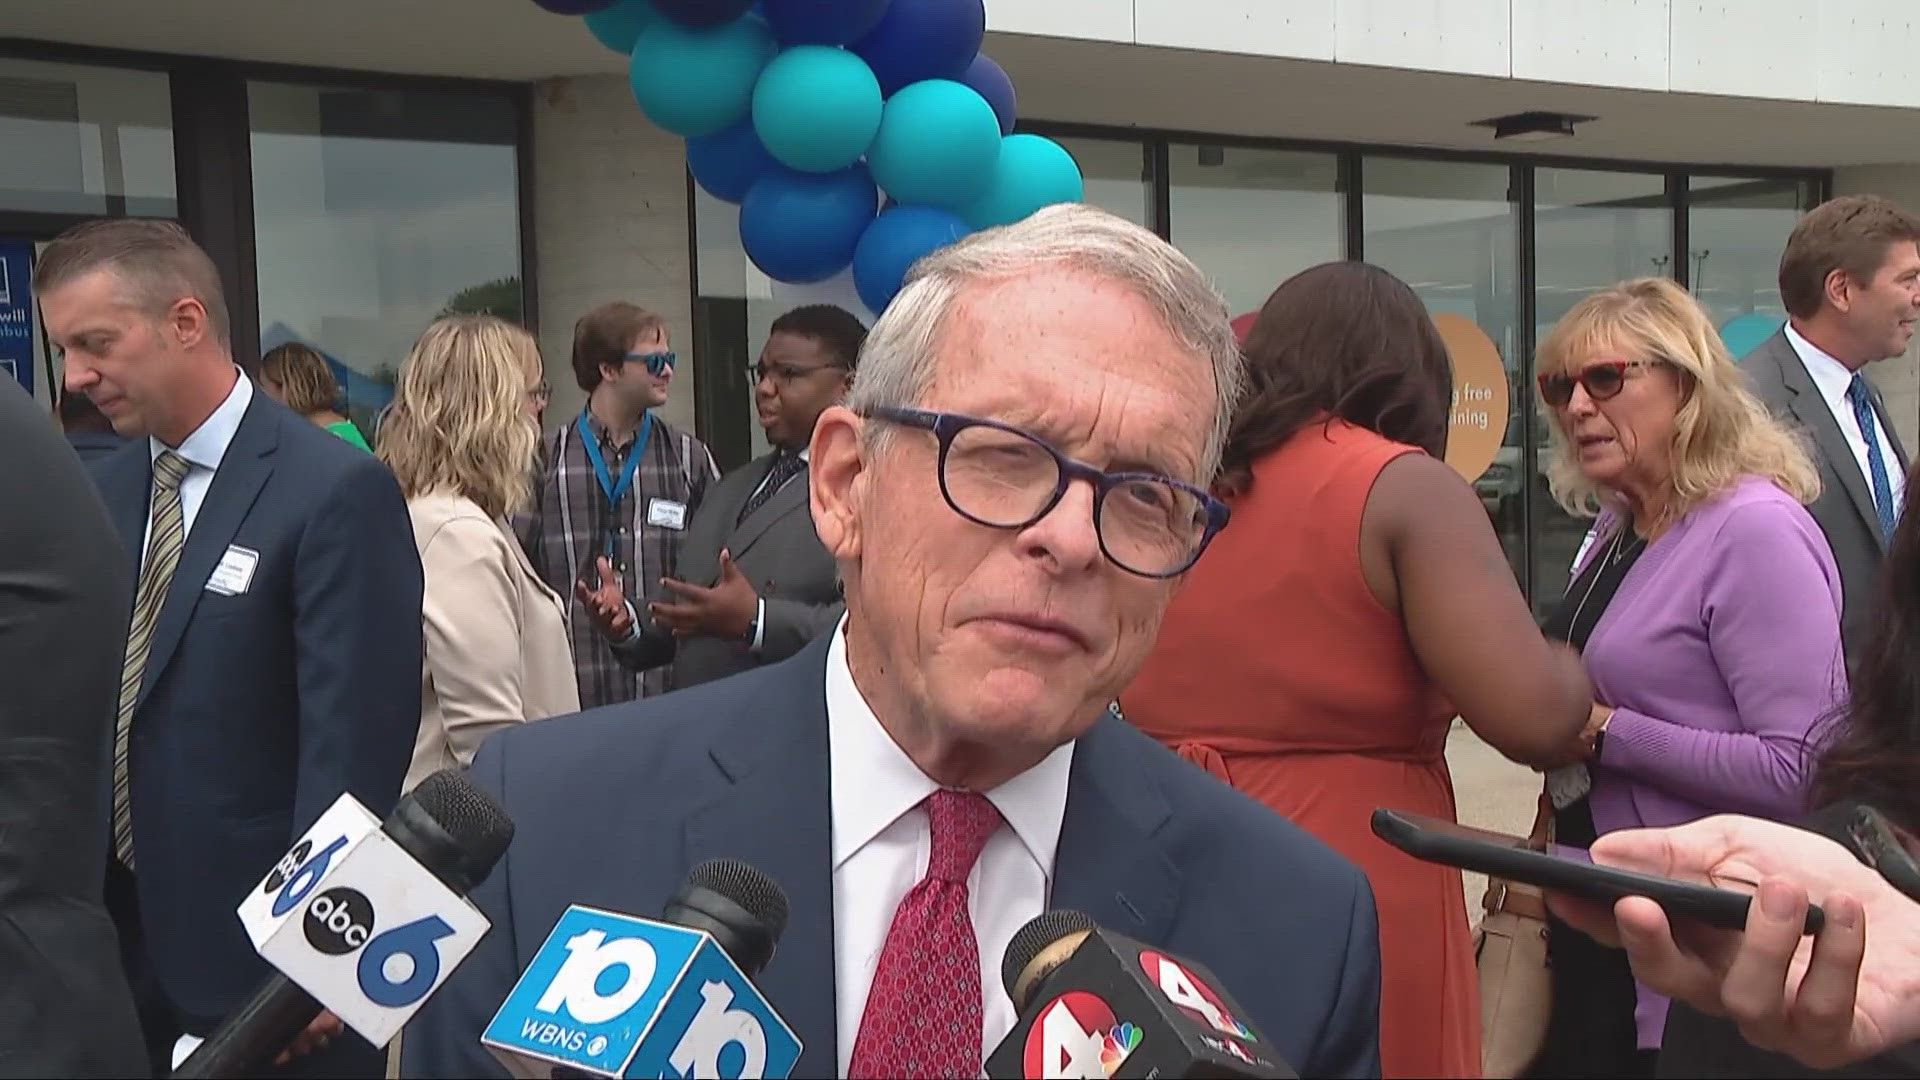 DeWine's office says the governor is resting at home.